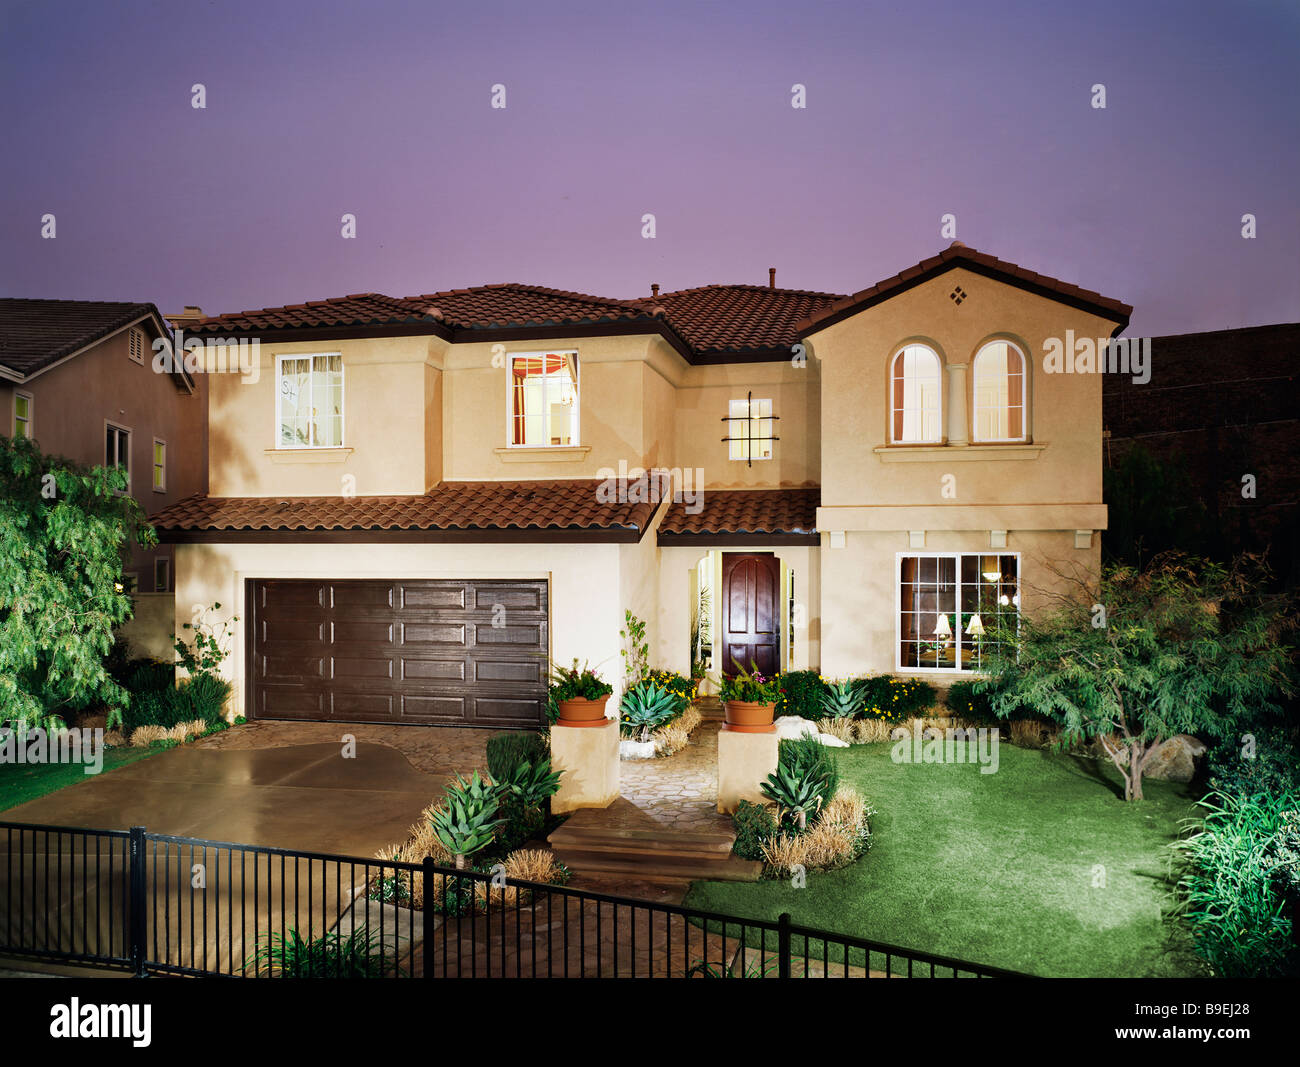 Front exterior multiple story spanish style home Stock Photo